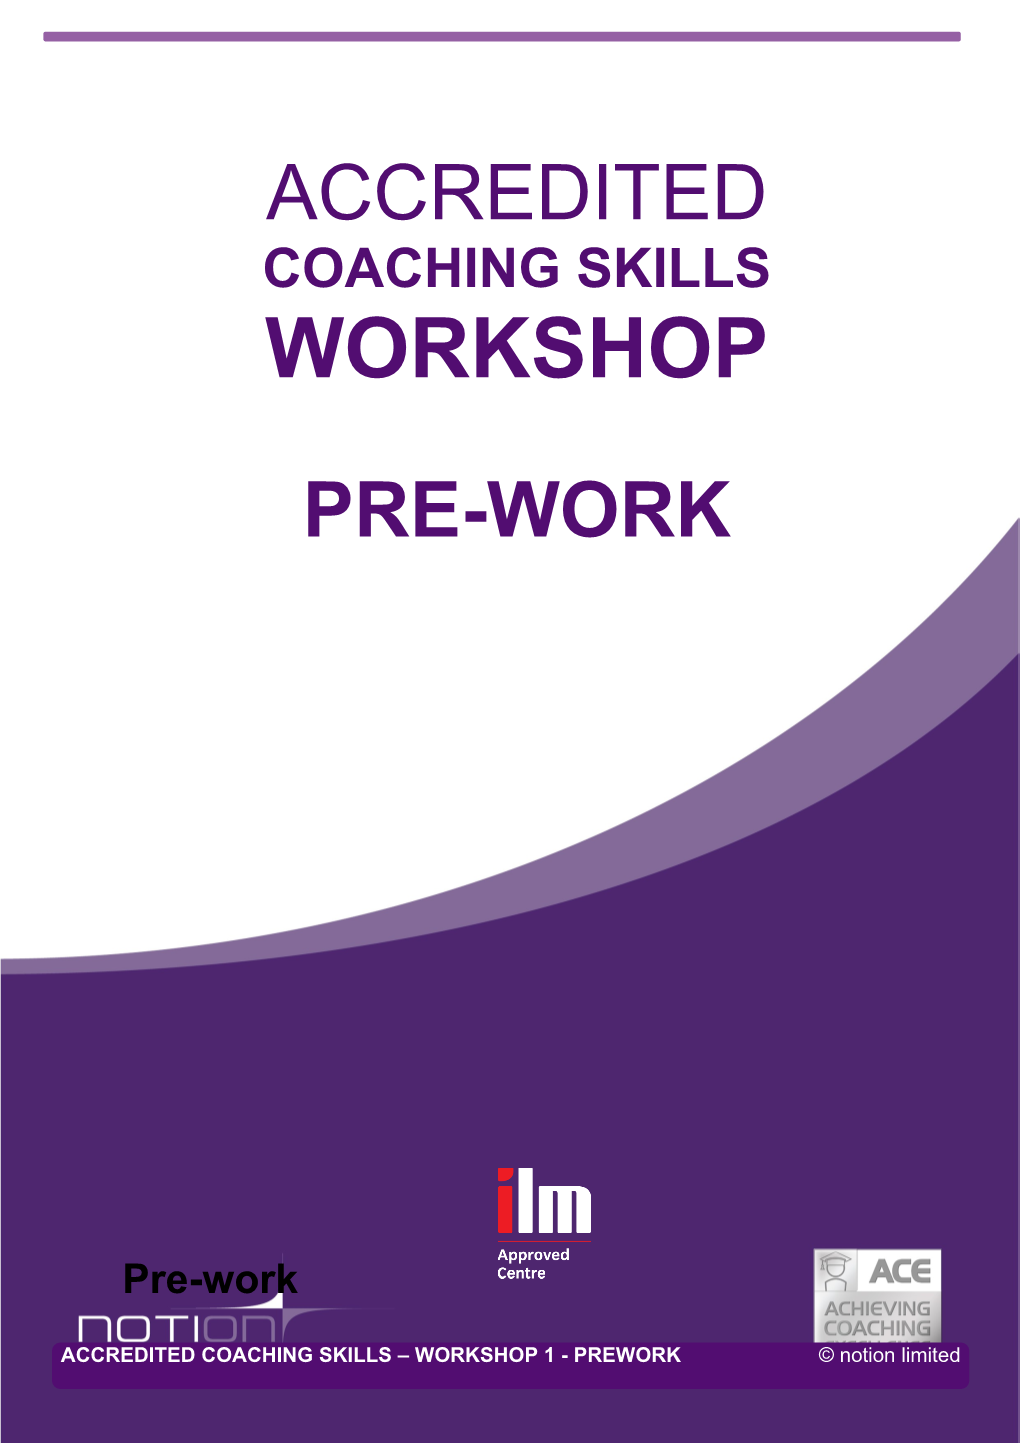 Please Complete the Following Pre-Work Exercises and Bring Them with You to the Workshops